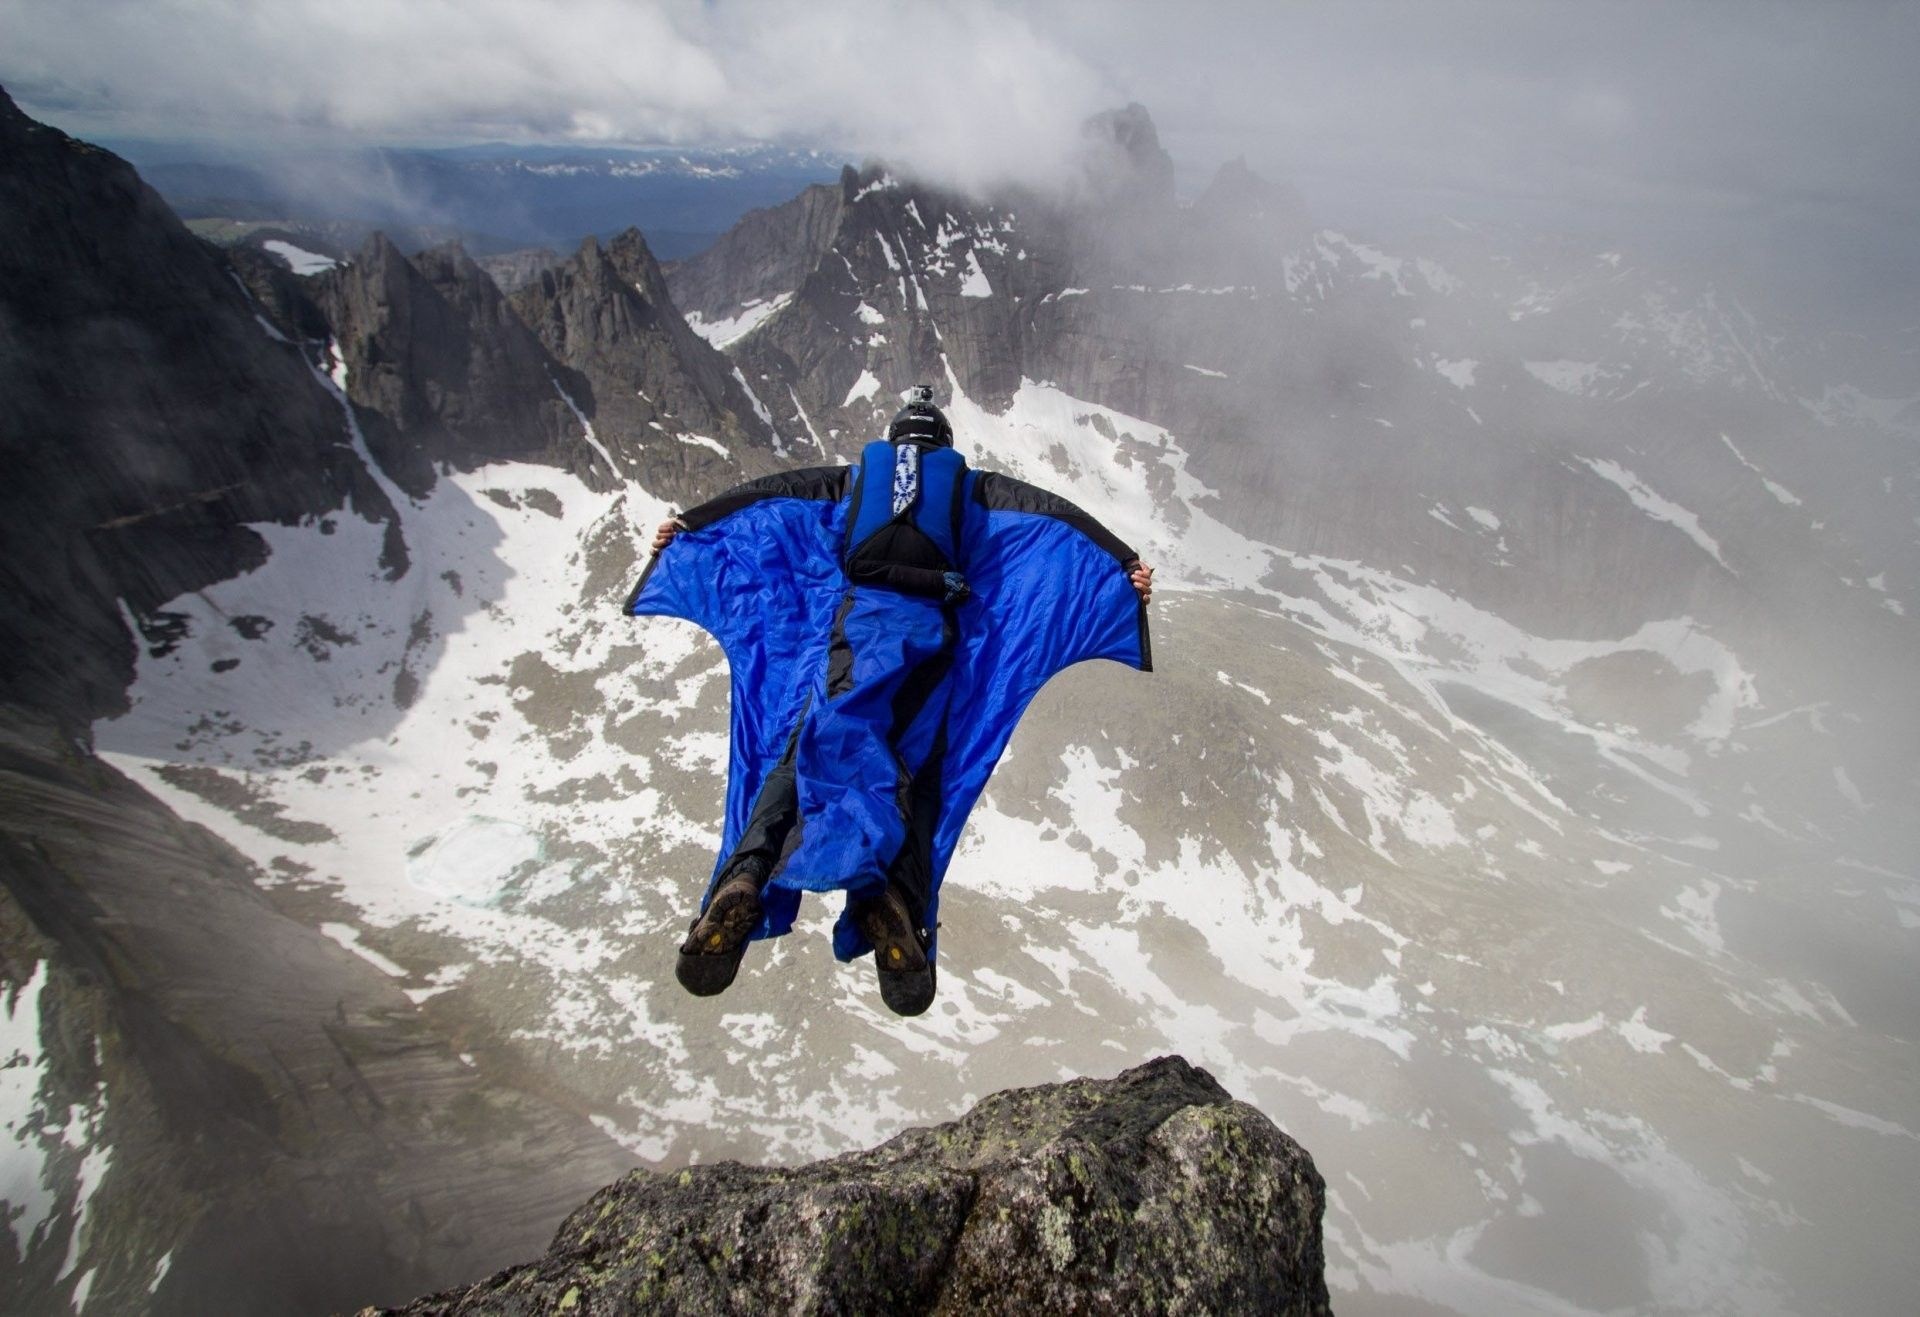 Wingsuit Flying: Wingsuiting in the mountains, Webbing-sleeved jumpsuit technology, Air sport. 1920x1320 HD Background.